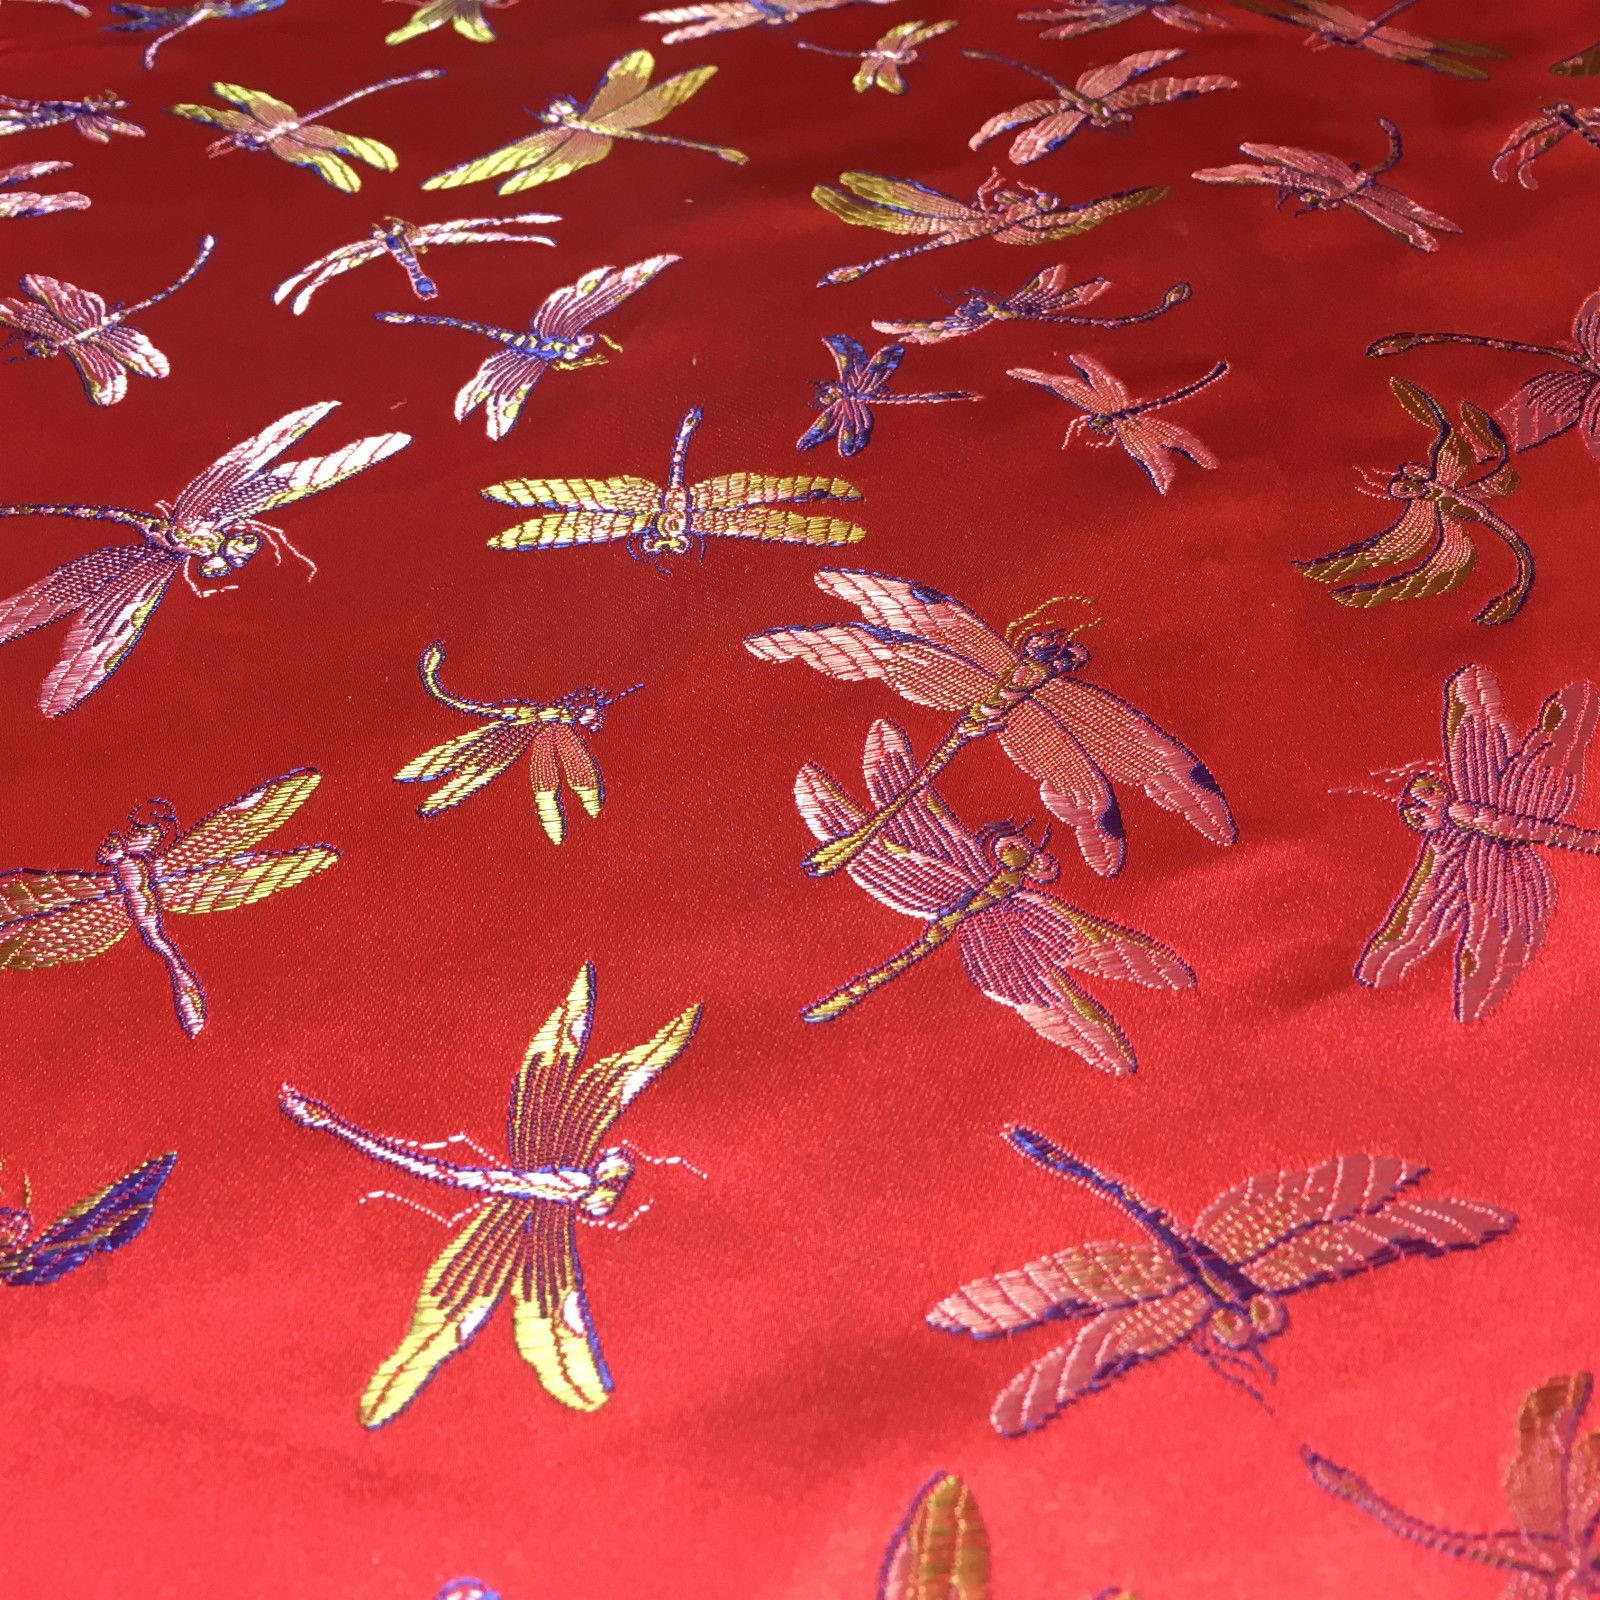 CHINESE ORIENTAL GOLD DRAGONFLY BROCADE SILKY SATIN DRESS FABRIC 44" M163